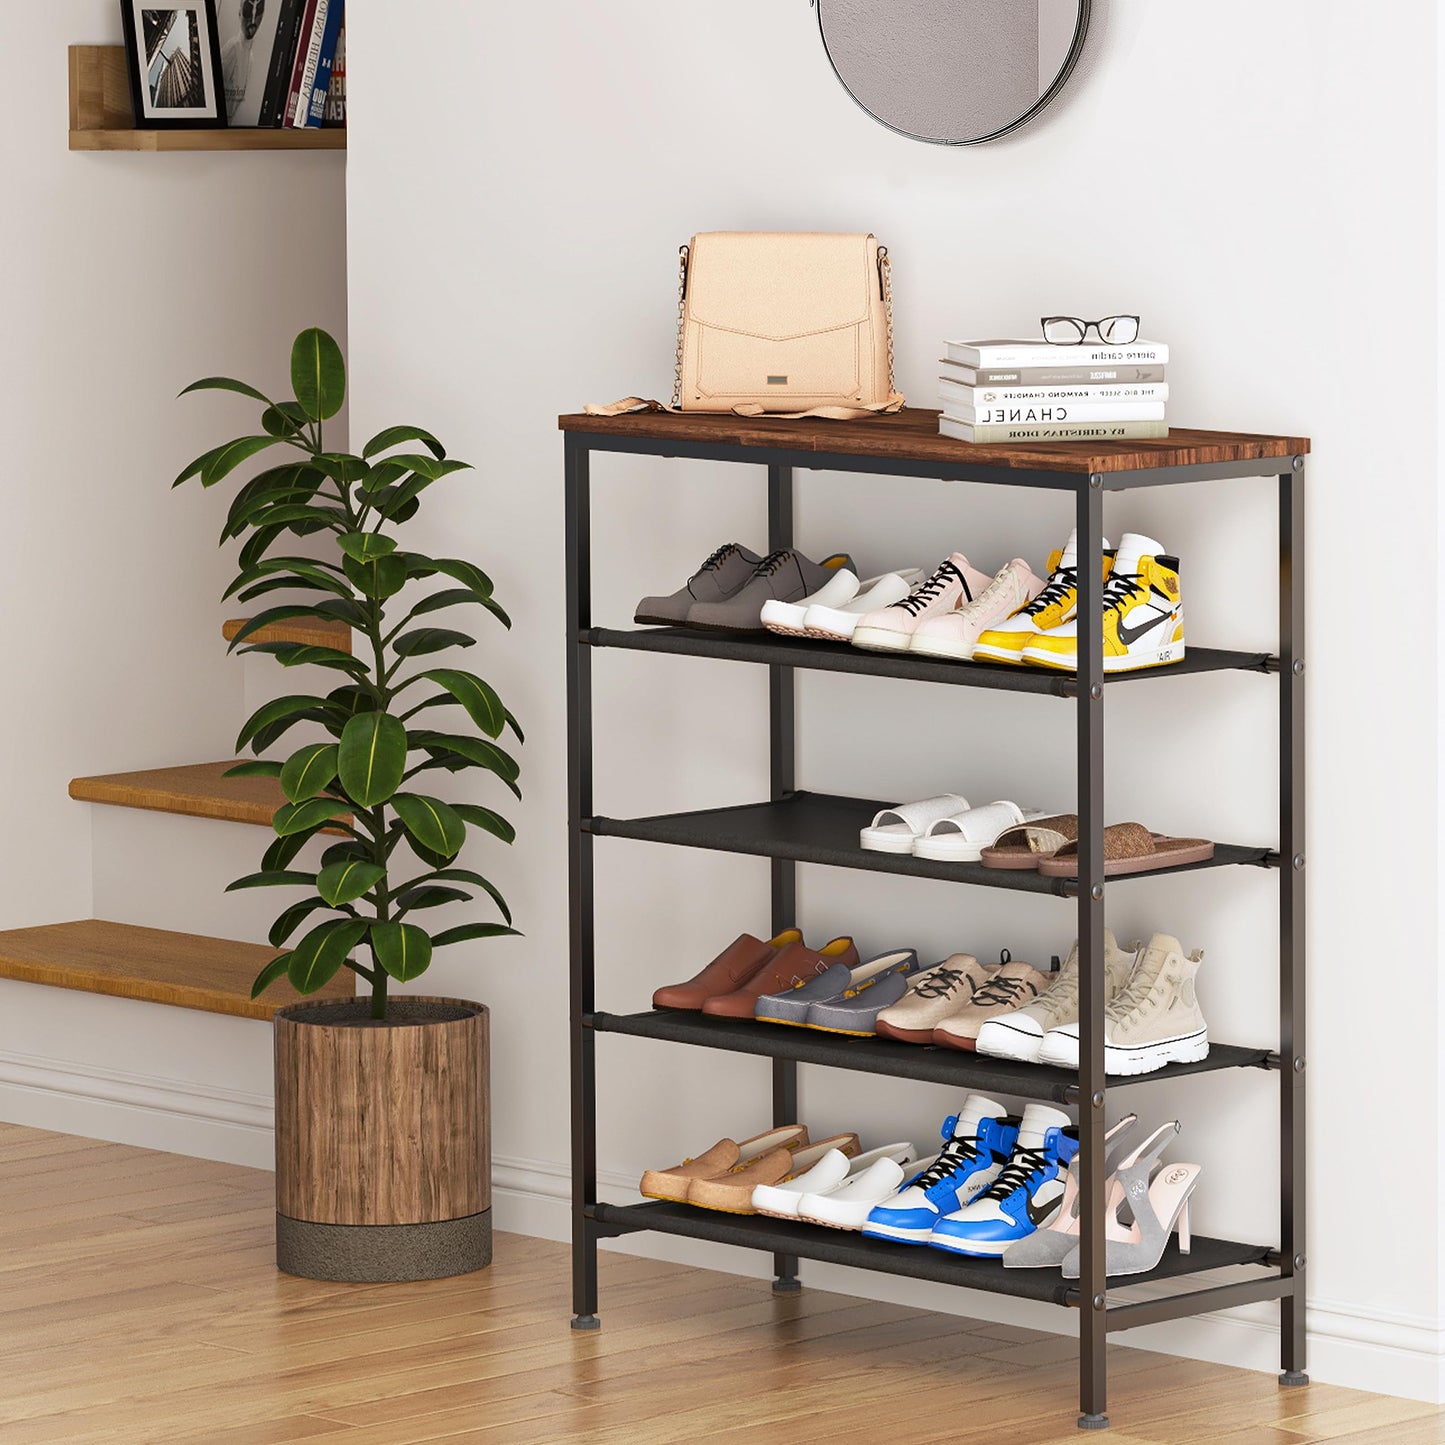 Z&L HOUSE 5 Tier Shoe Rack Organizer for Entryway, Sturdy Black Metal Framed Free Standing Shoe Shelf, Uniquely Versatile and Spacious Wood Top